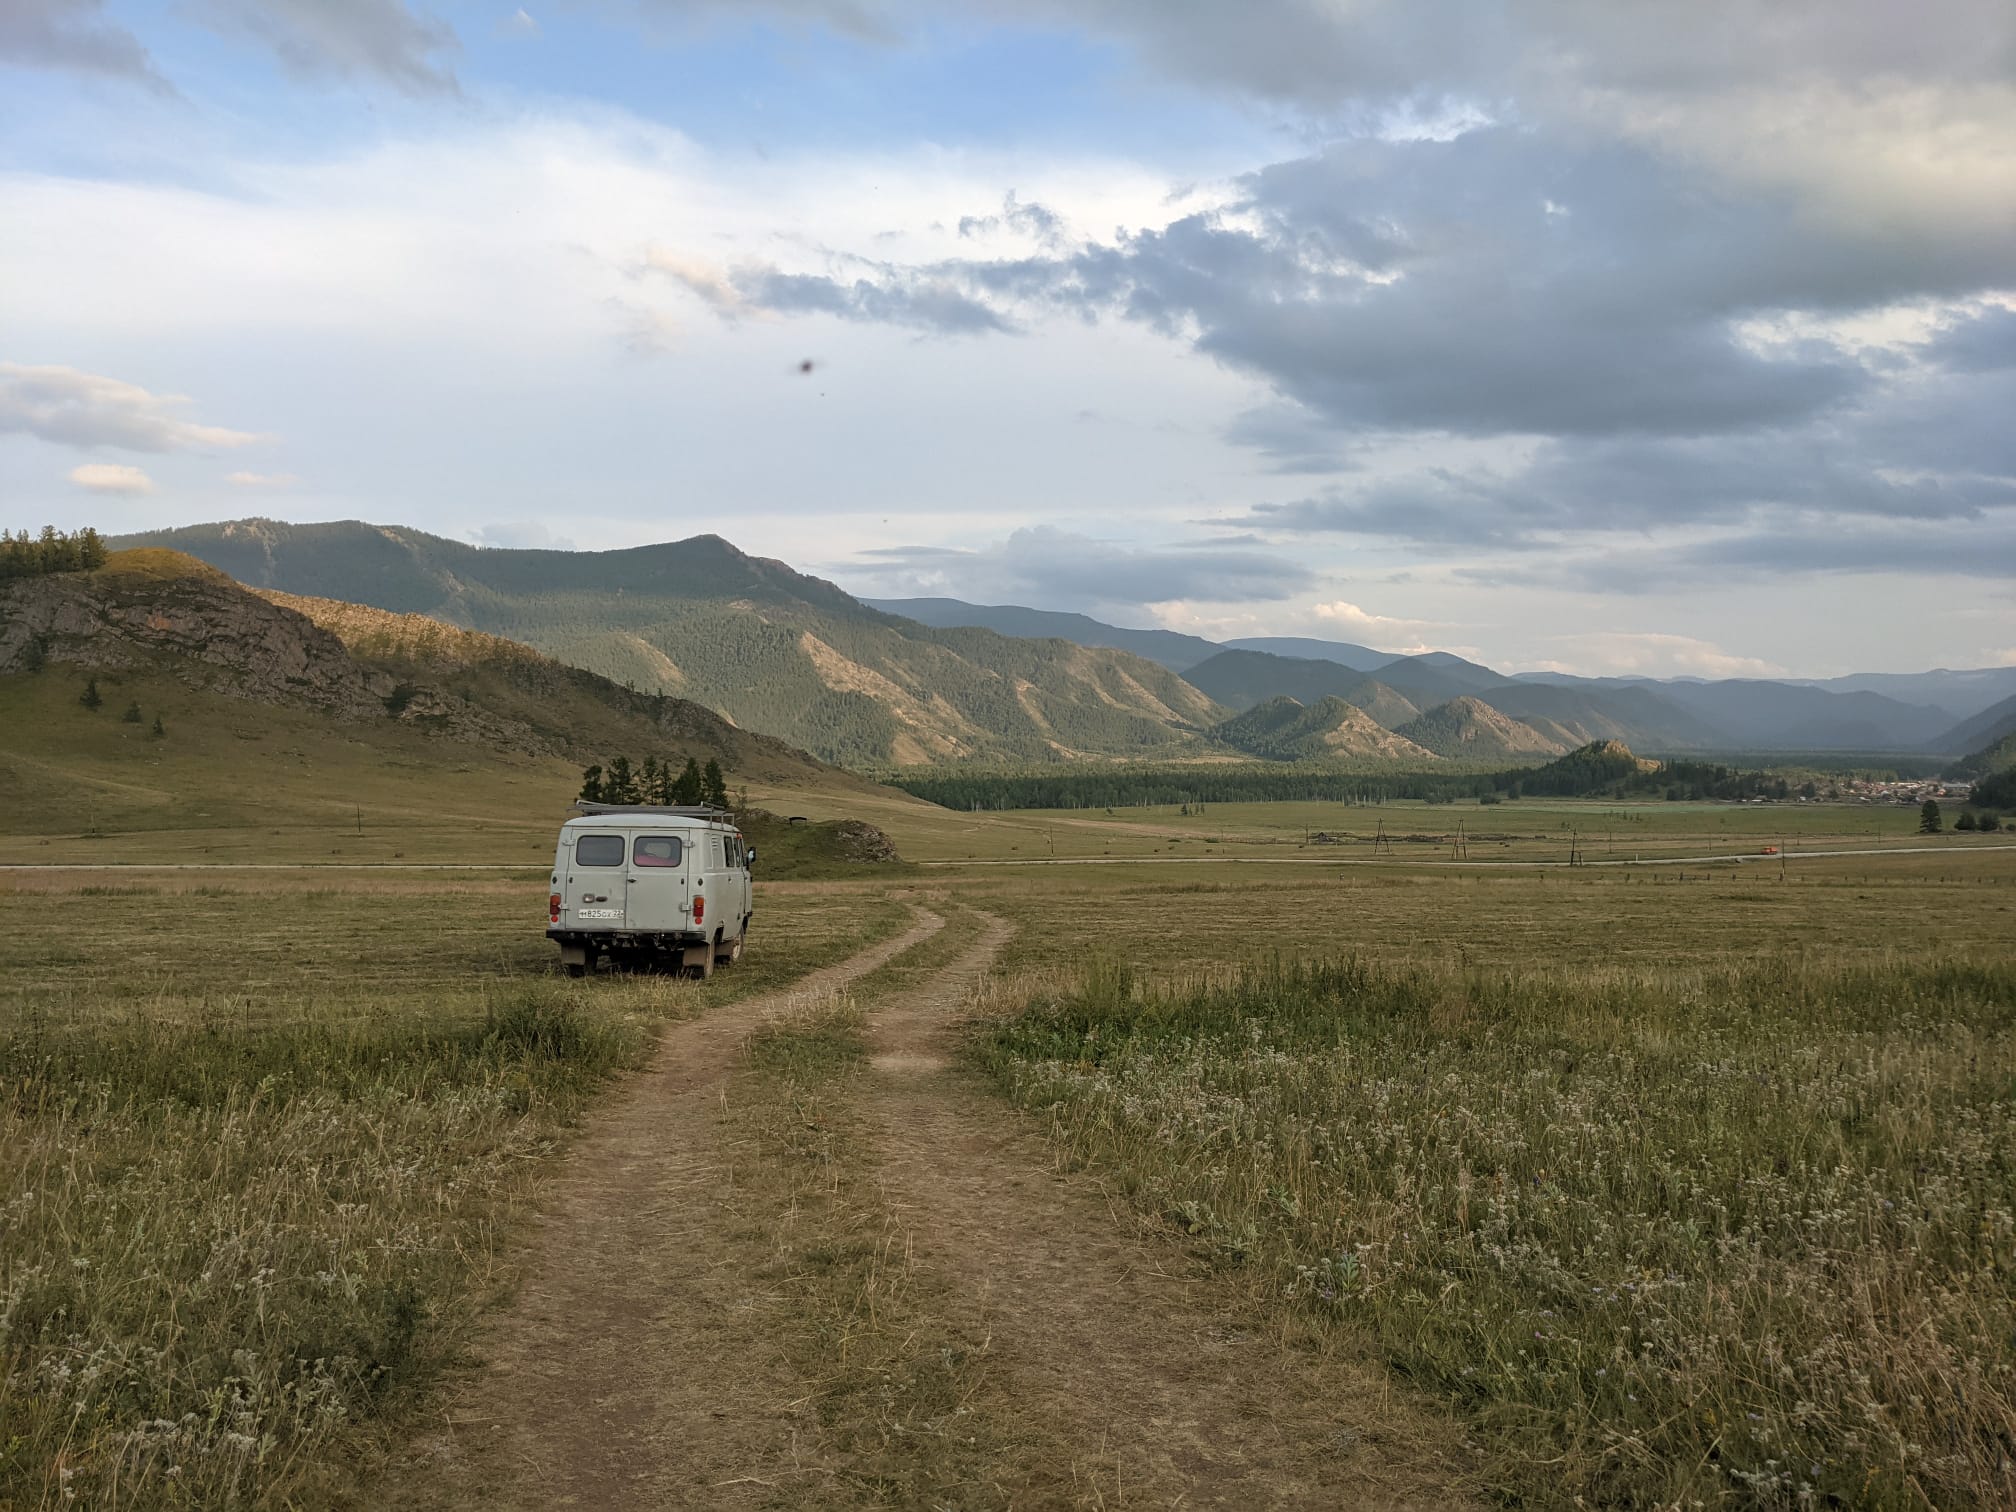 A grey van rides offroad through a field. In the distance there are layers of hills which are illuminated by the sun.